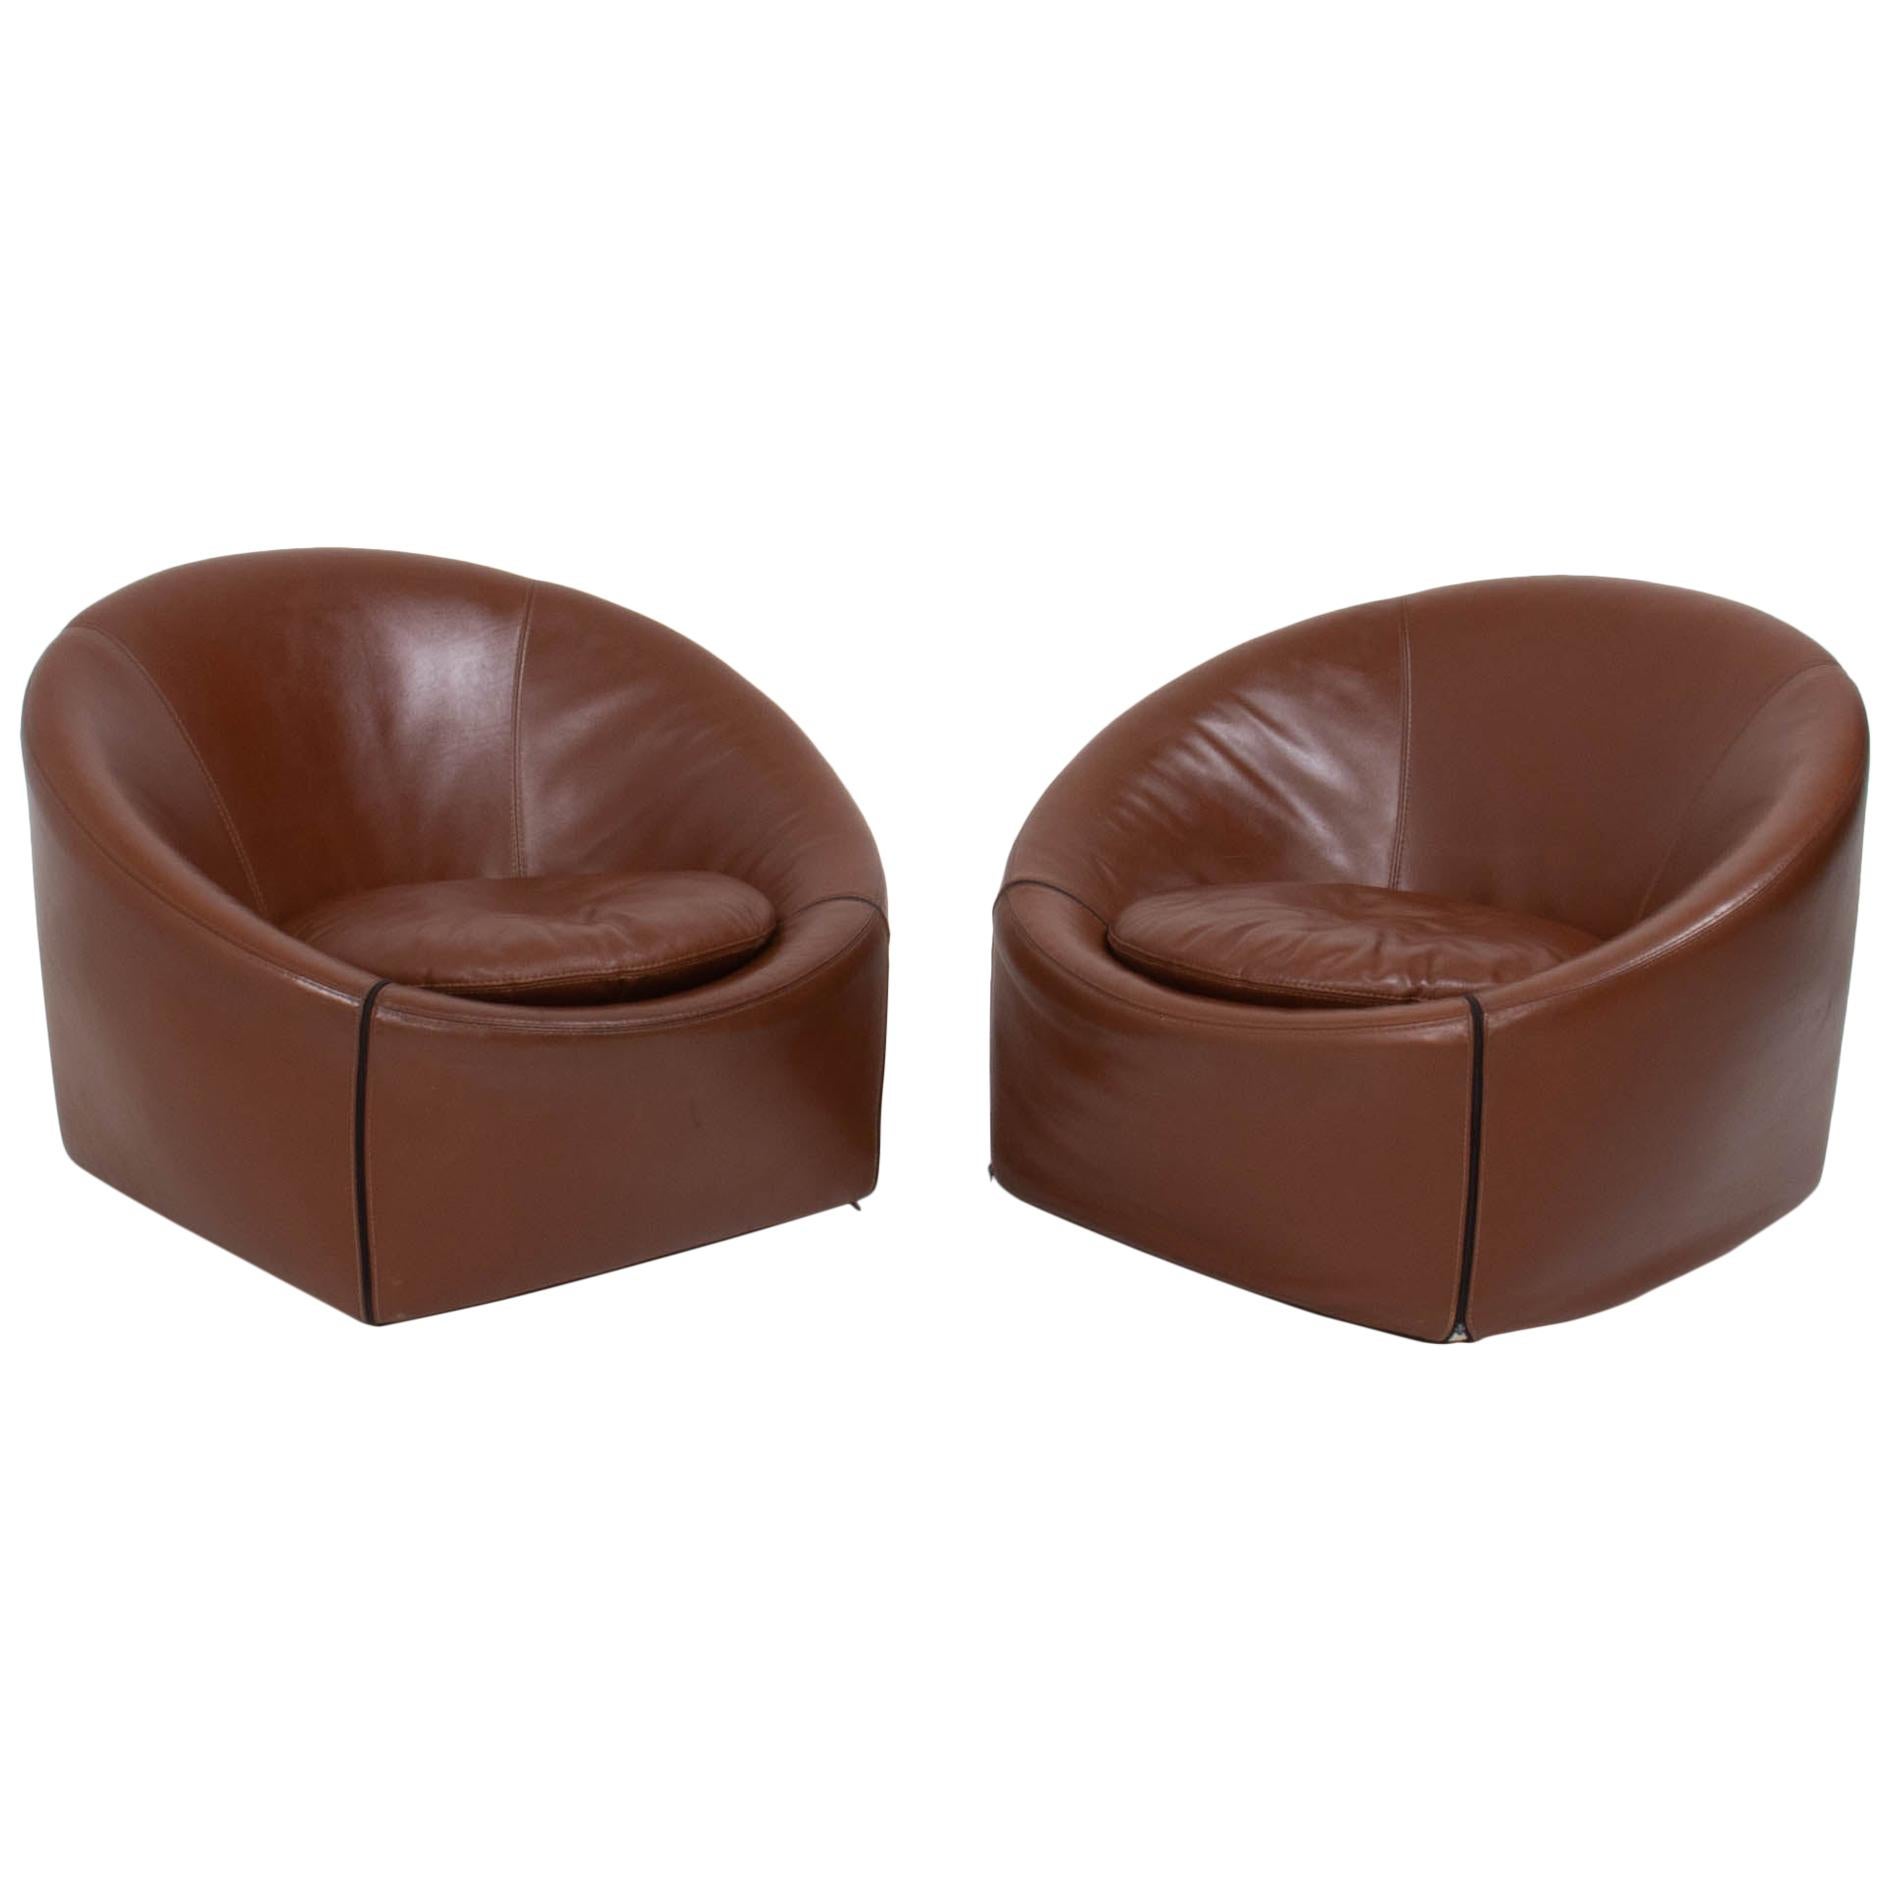 Minotti by Gordon Guillaumier Brown Leather Capri Armchairs, Set of 2, 2005